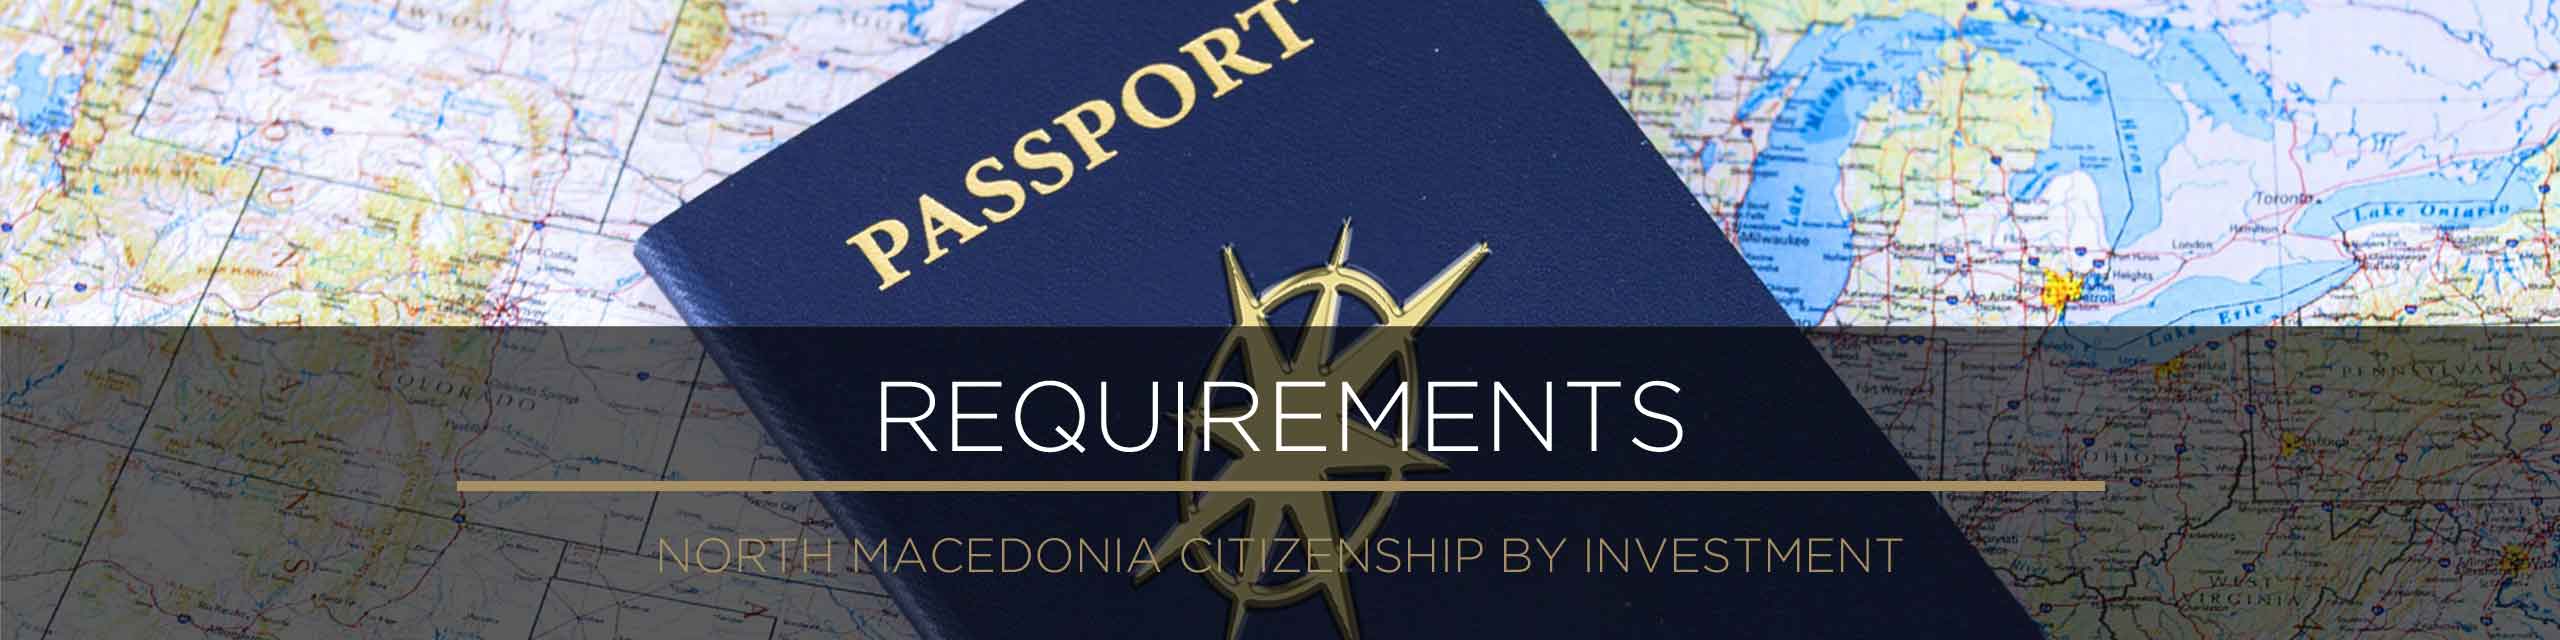 Requirements for North Macedonia citizenship program